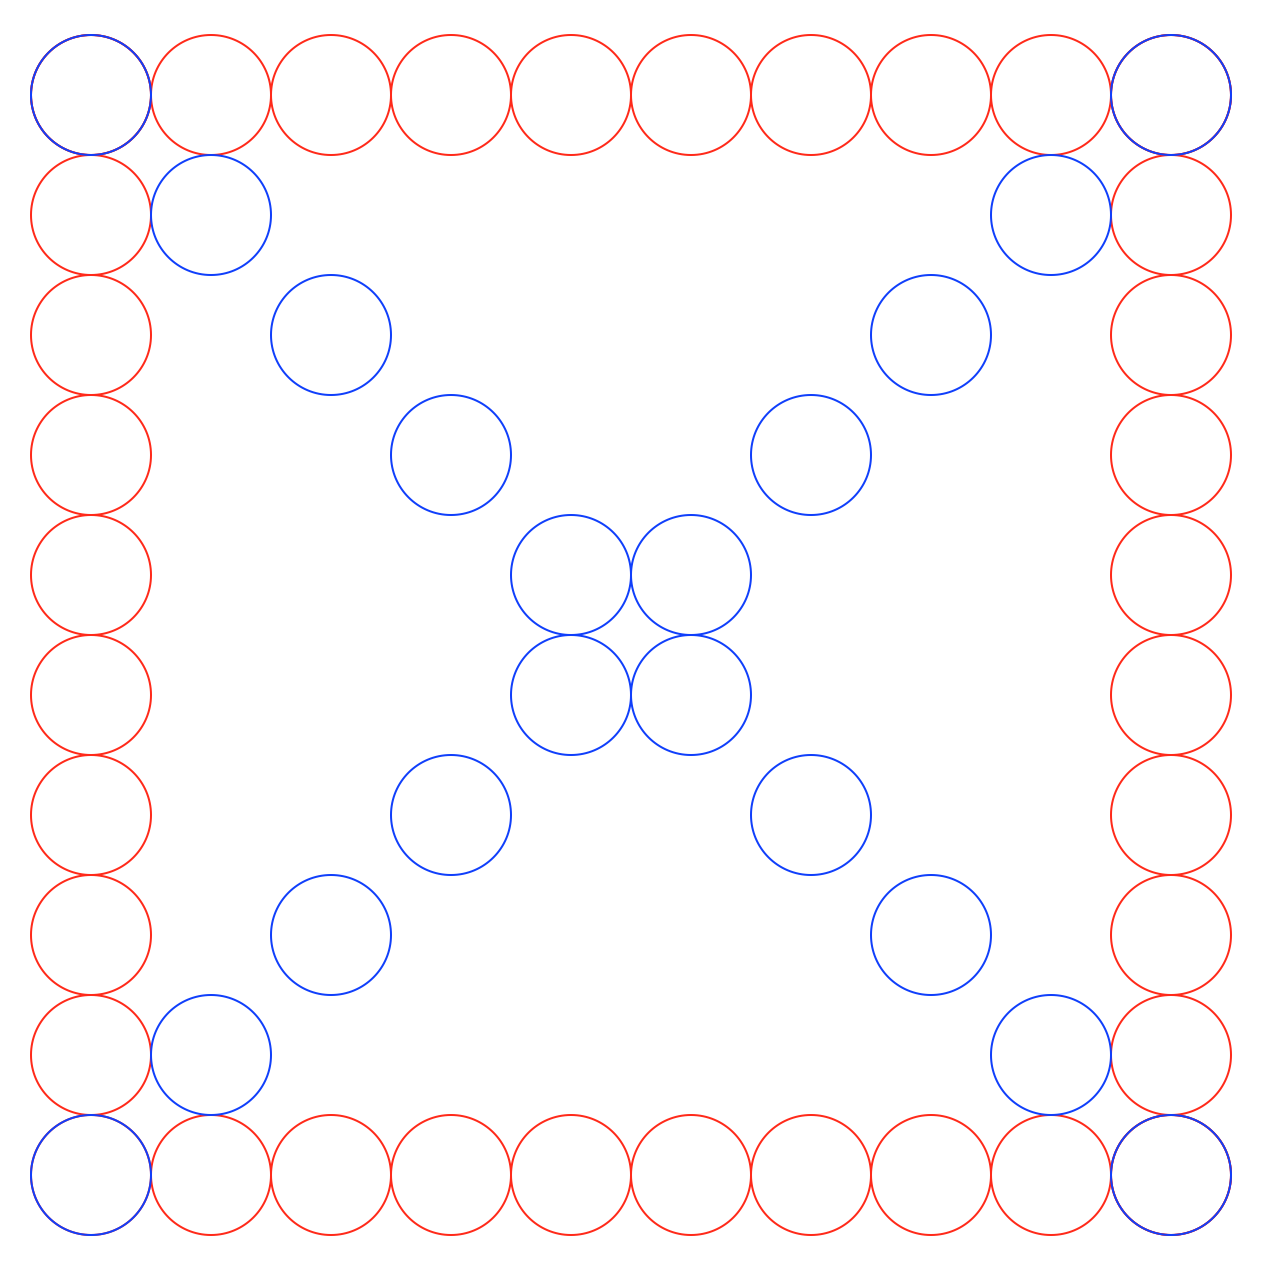 Square of 10 circles by 10 circles, with the diagonal filled in